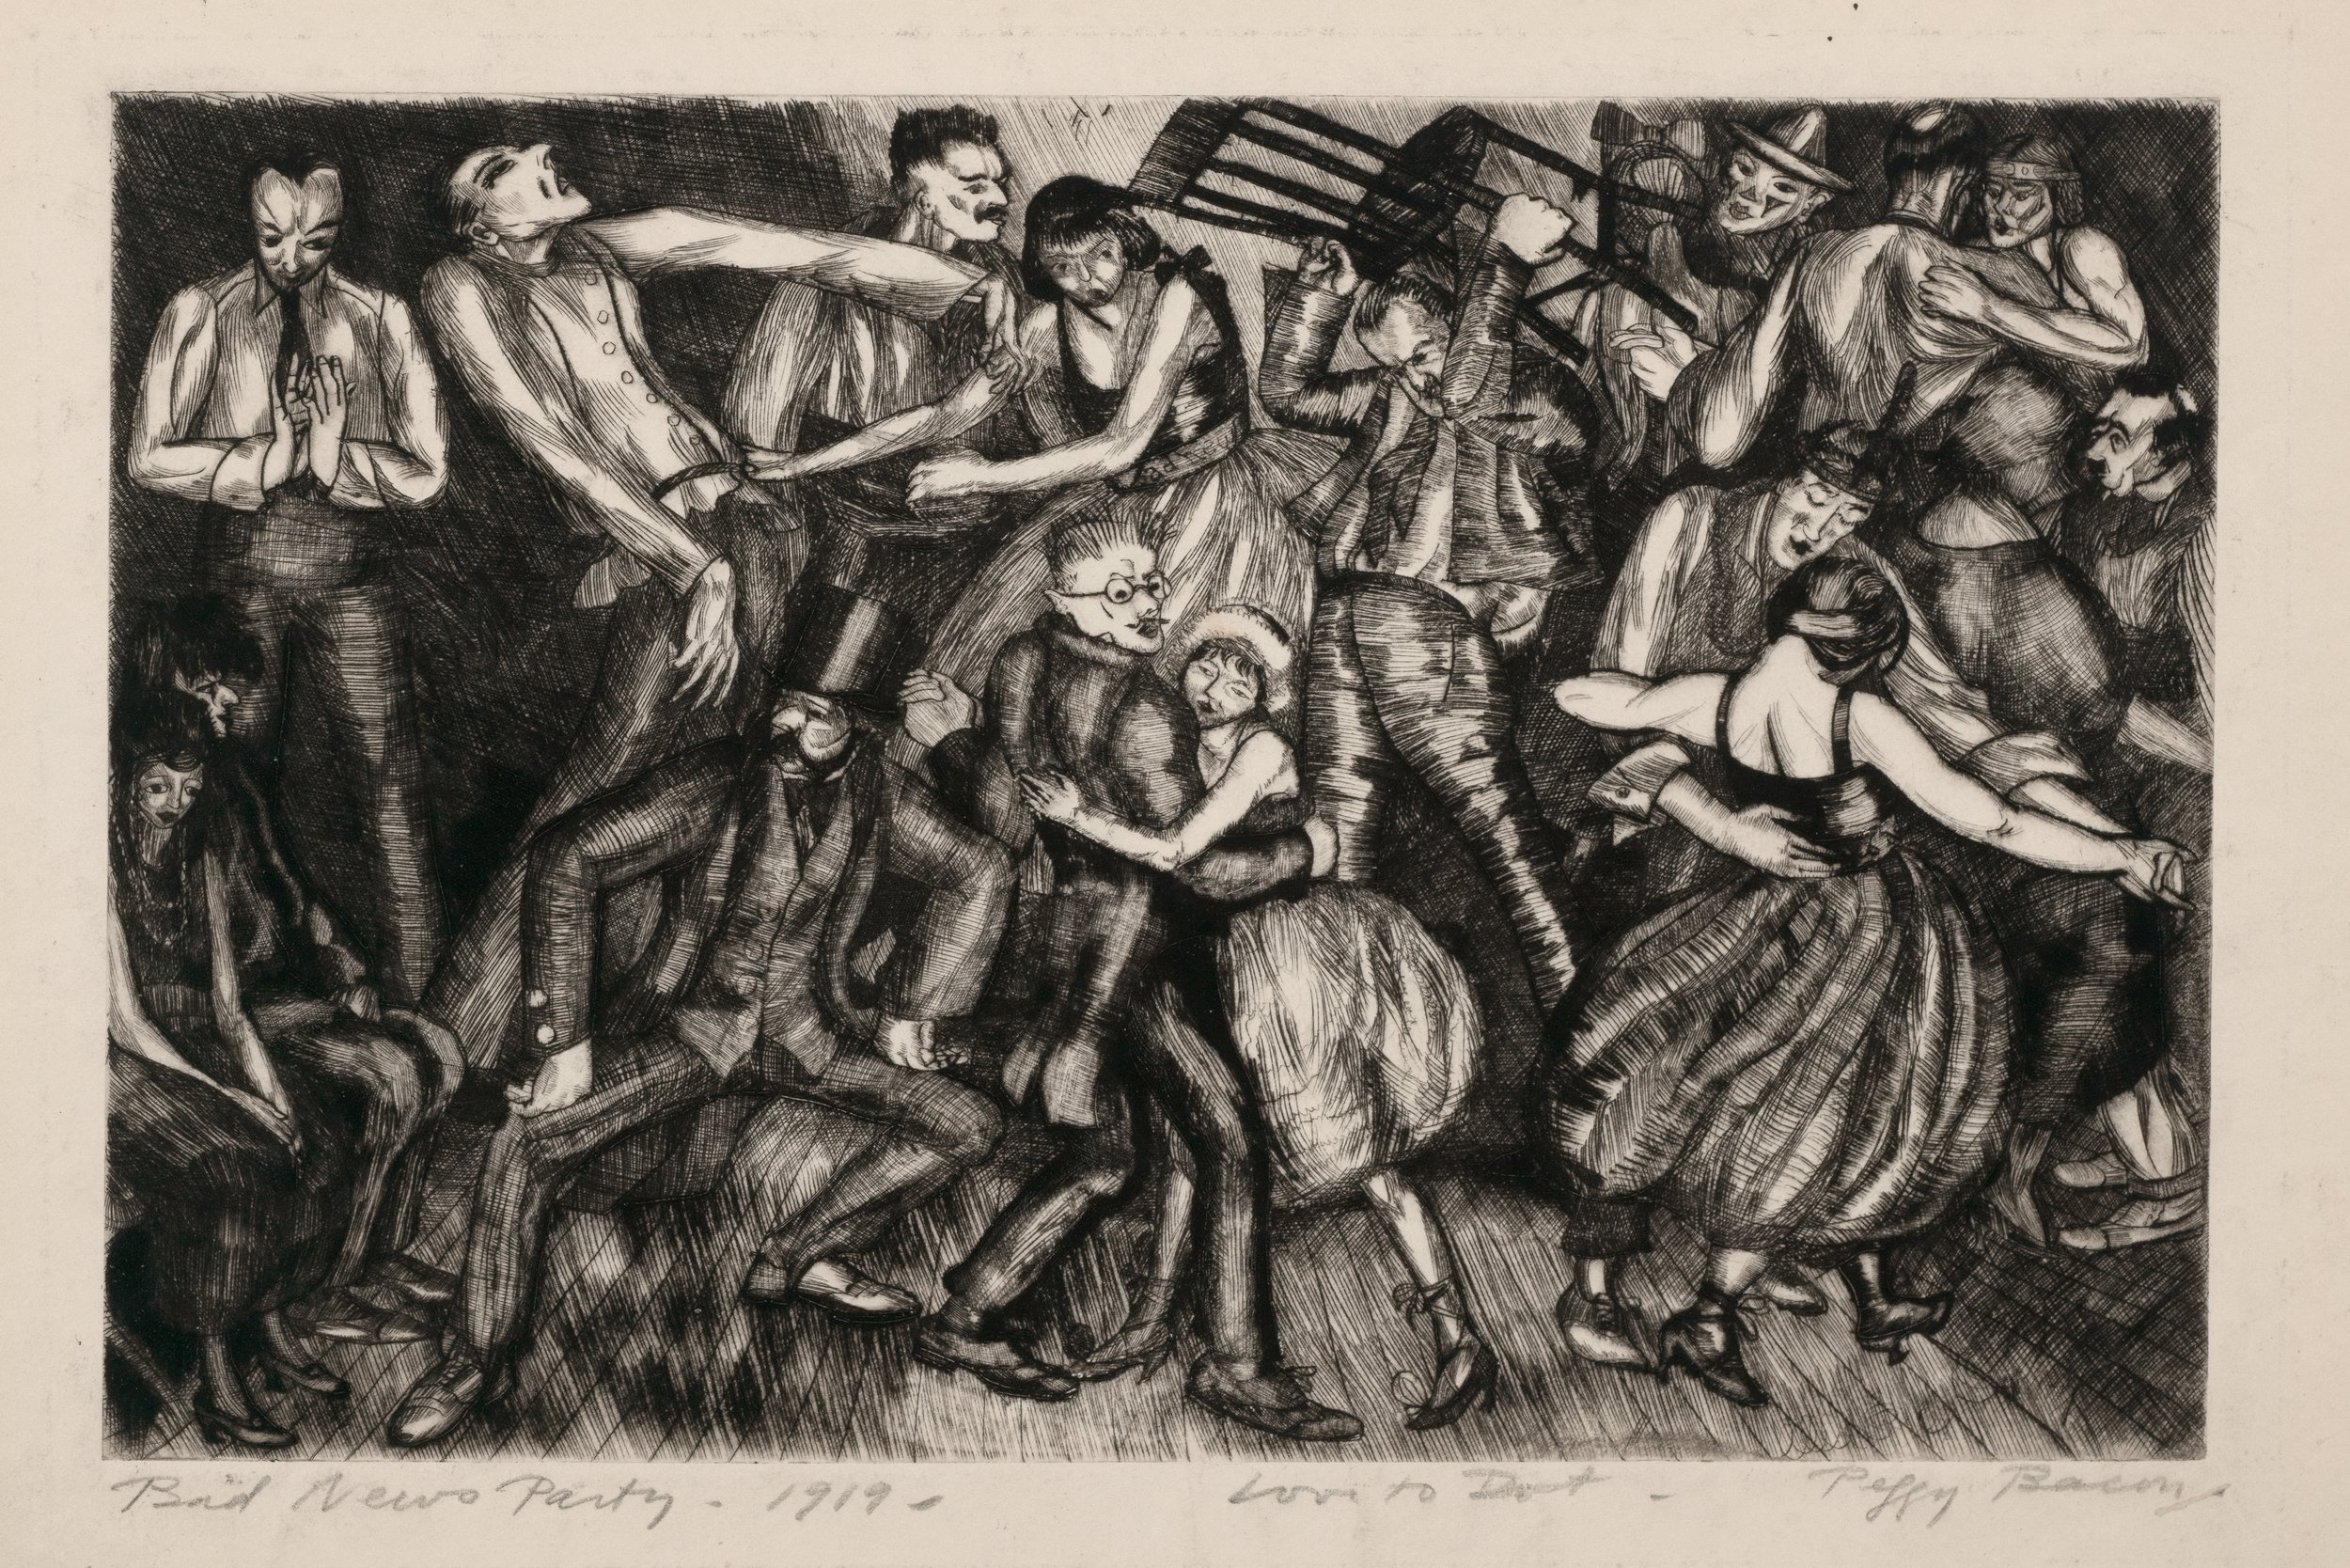  Peggy Bacon (United States, 1895–1987),  Dance at the League,  1919, drypoint on wove paper, 6 7/8 x 9 13/16 inches. Gift of Harold Shaw, 1984.362. Image courtesy Petegorsky/Gipe Photo 